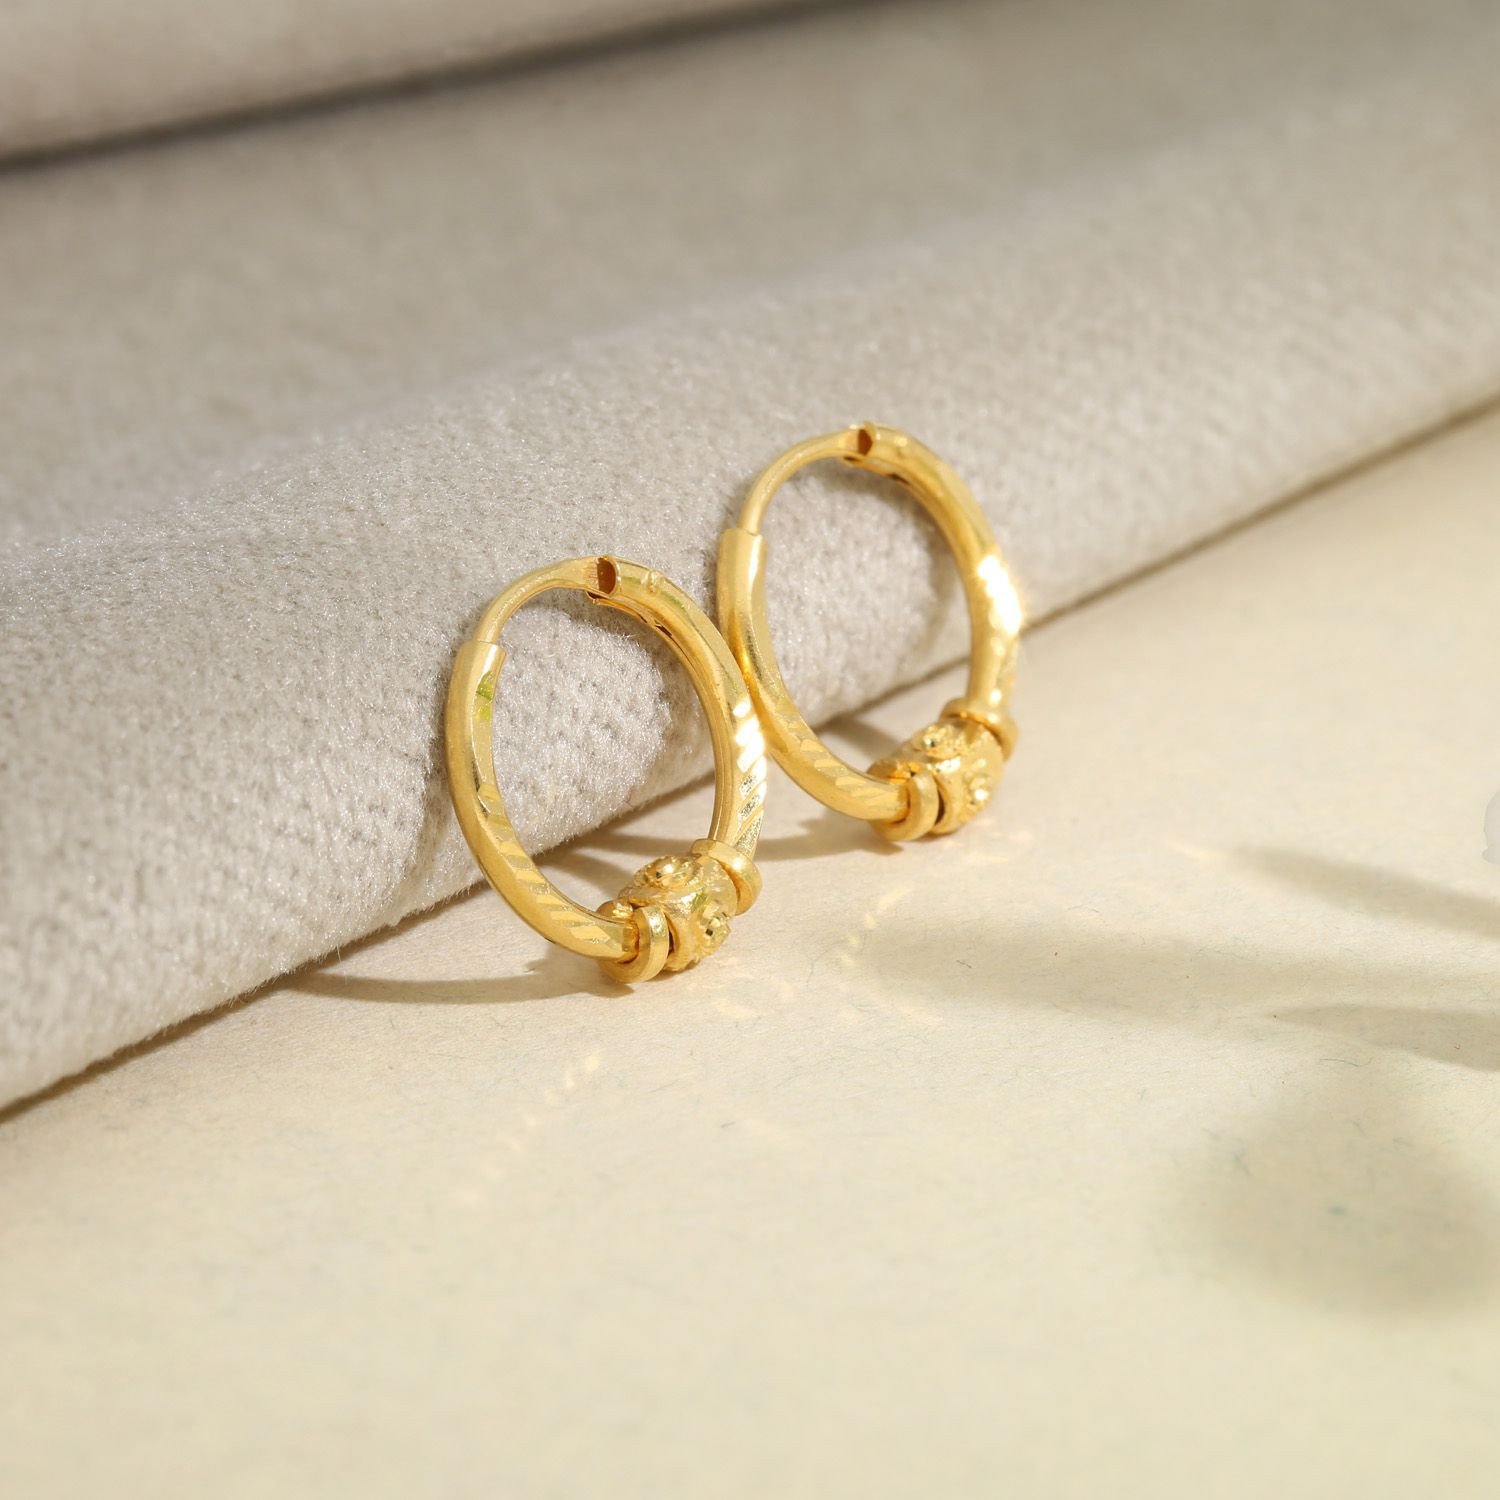 Details more than 175 baby rings in malabar gold